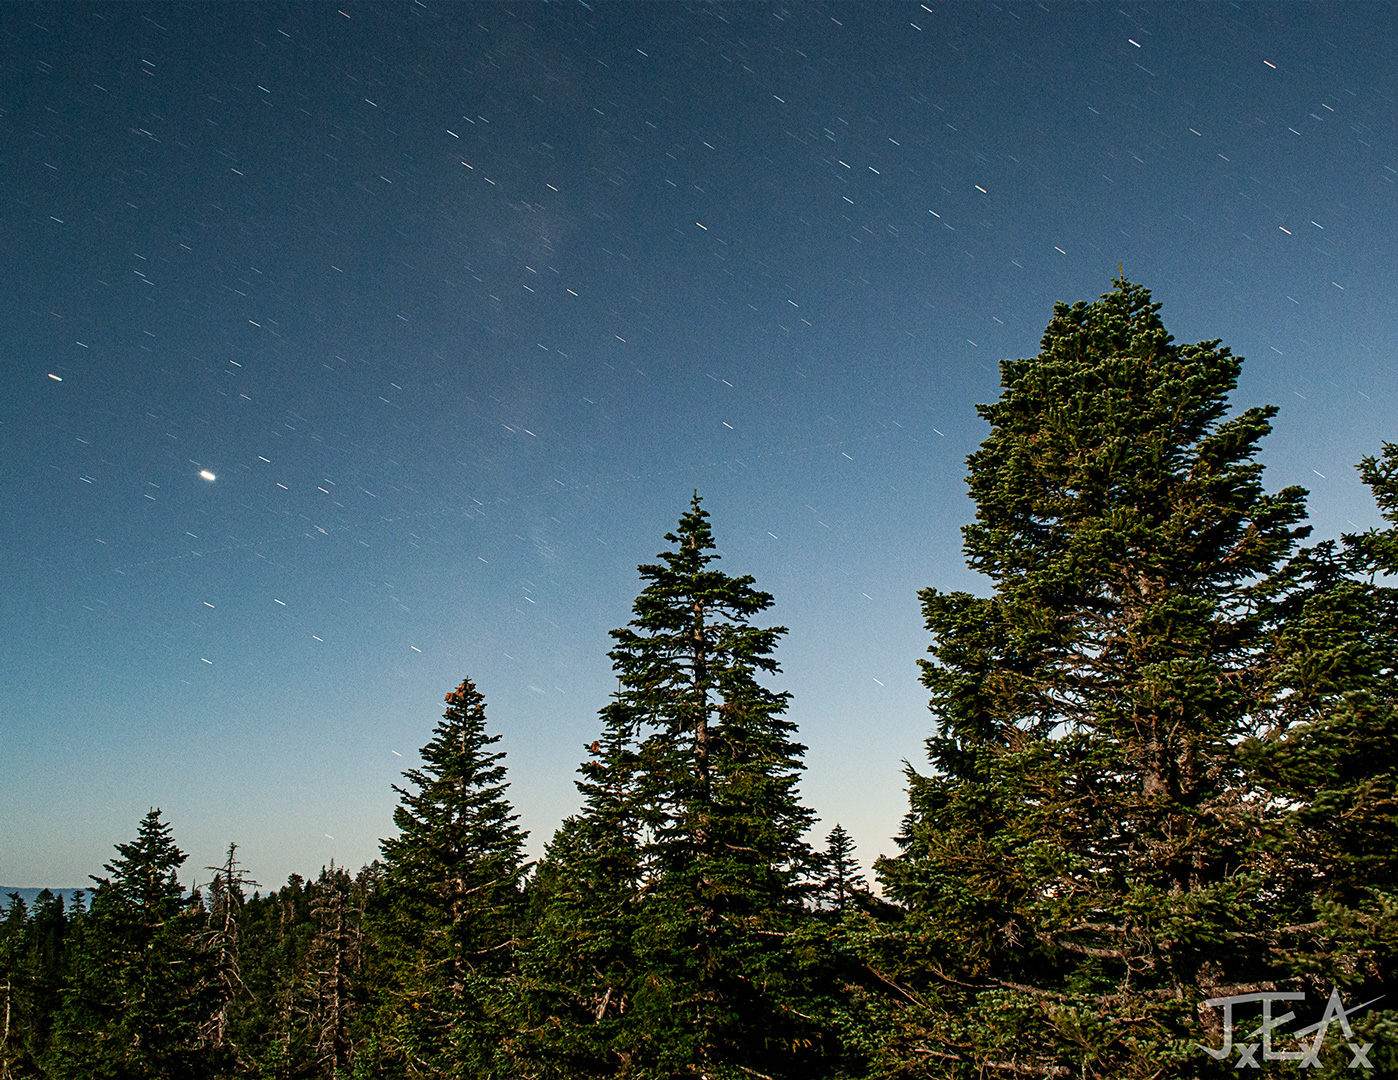 Majestic pine trees stand tall against a blue starry sky.